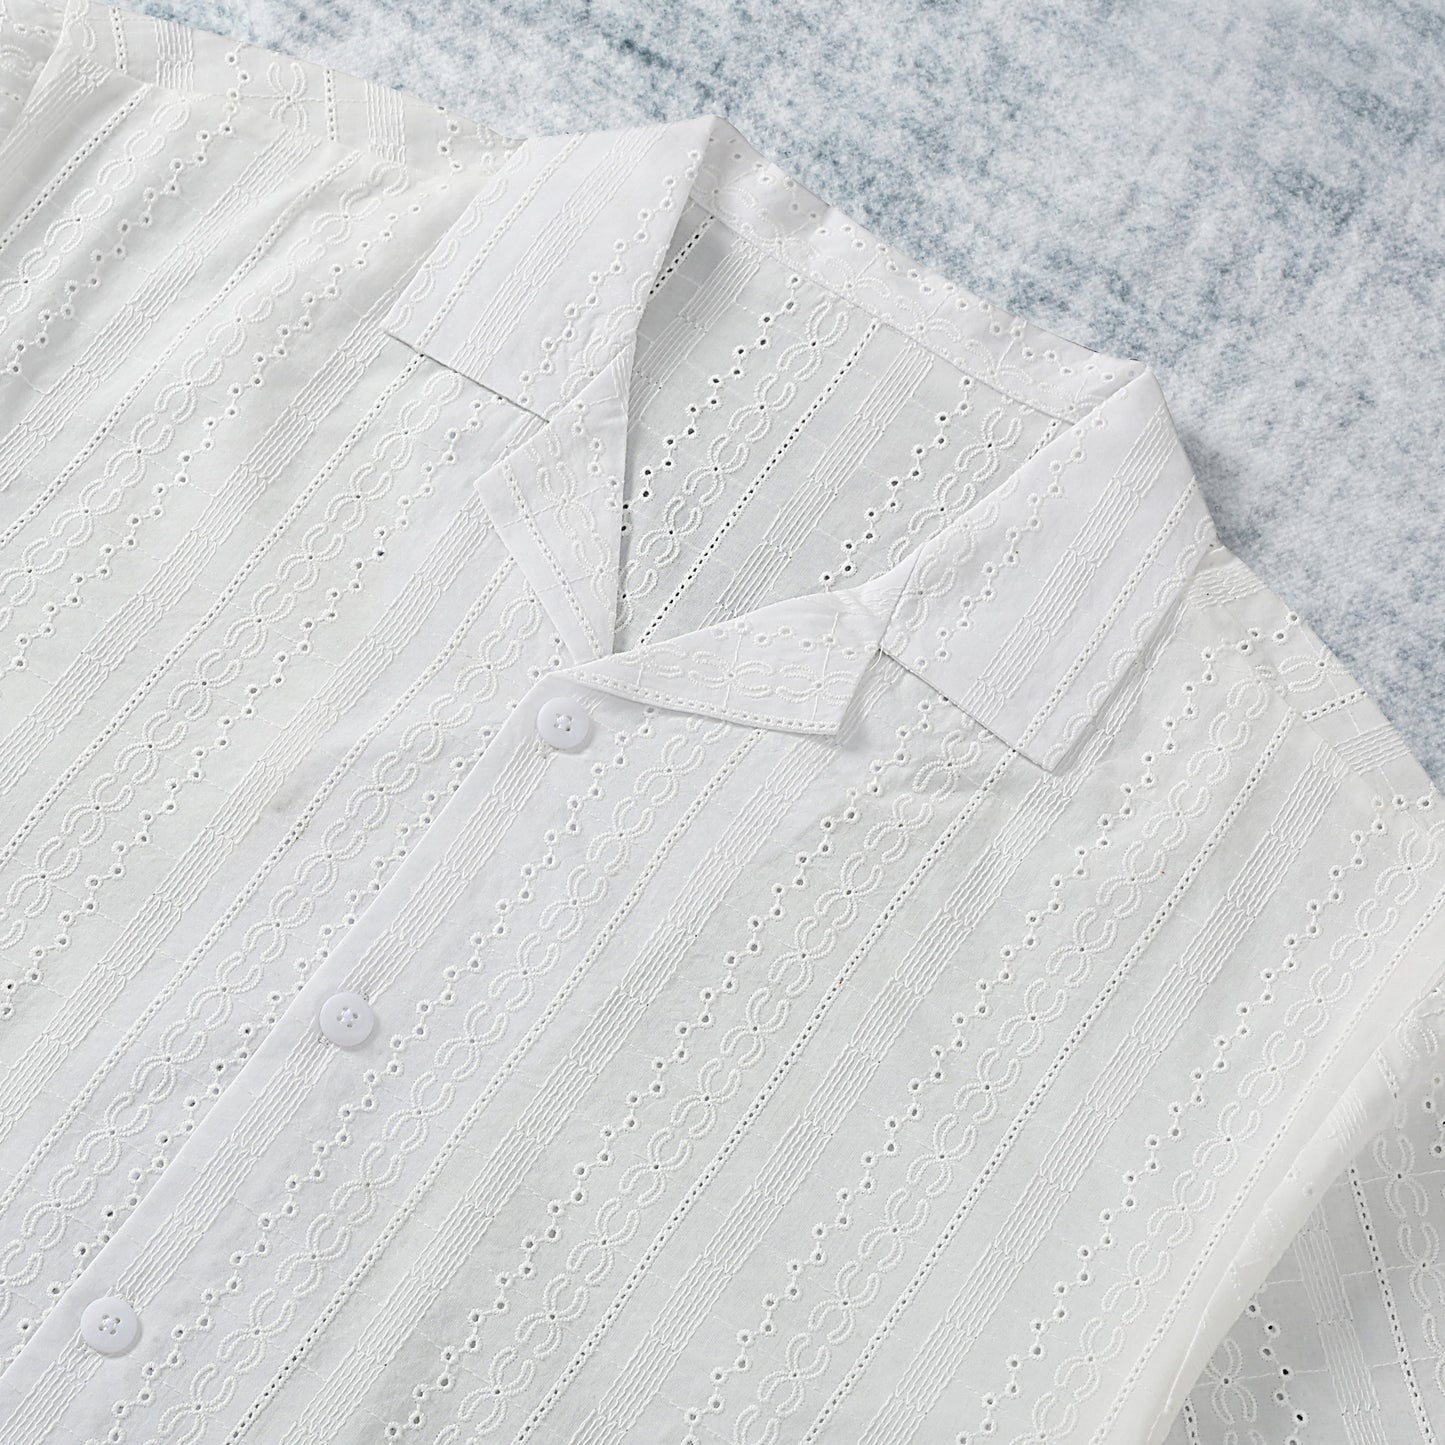 White Cotton Embroidery Textured Camp Collar Short Sleeve Shirt